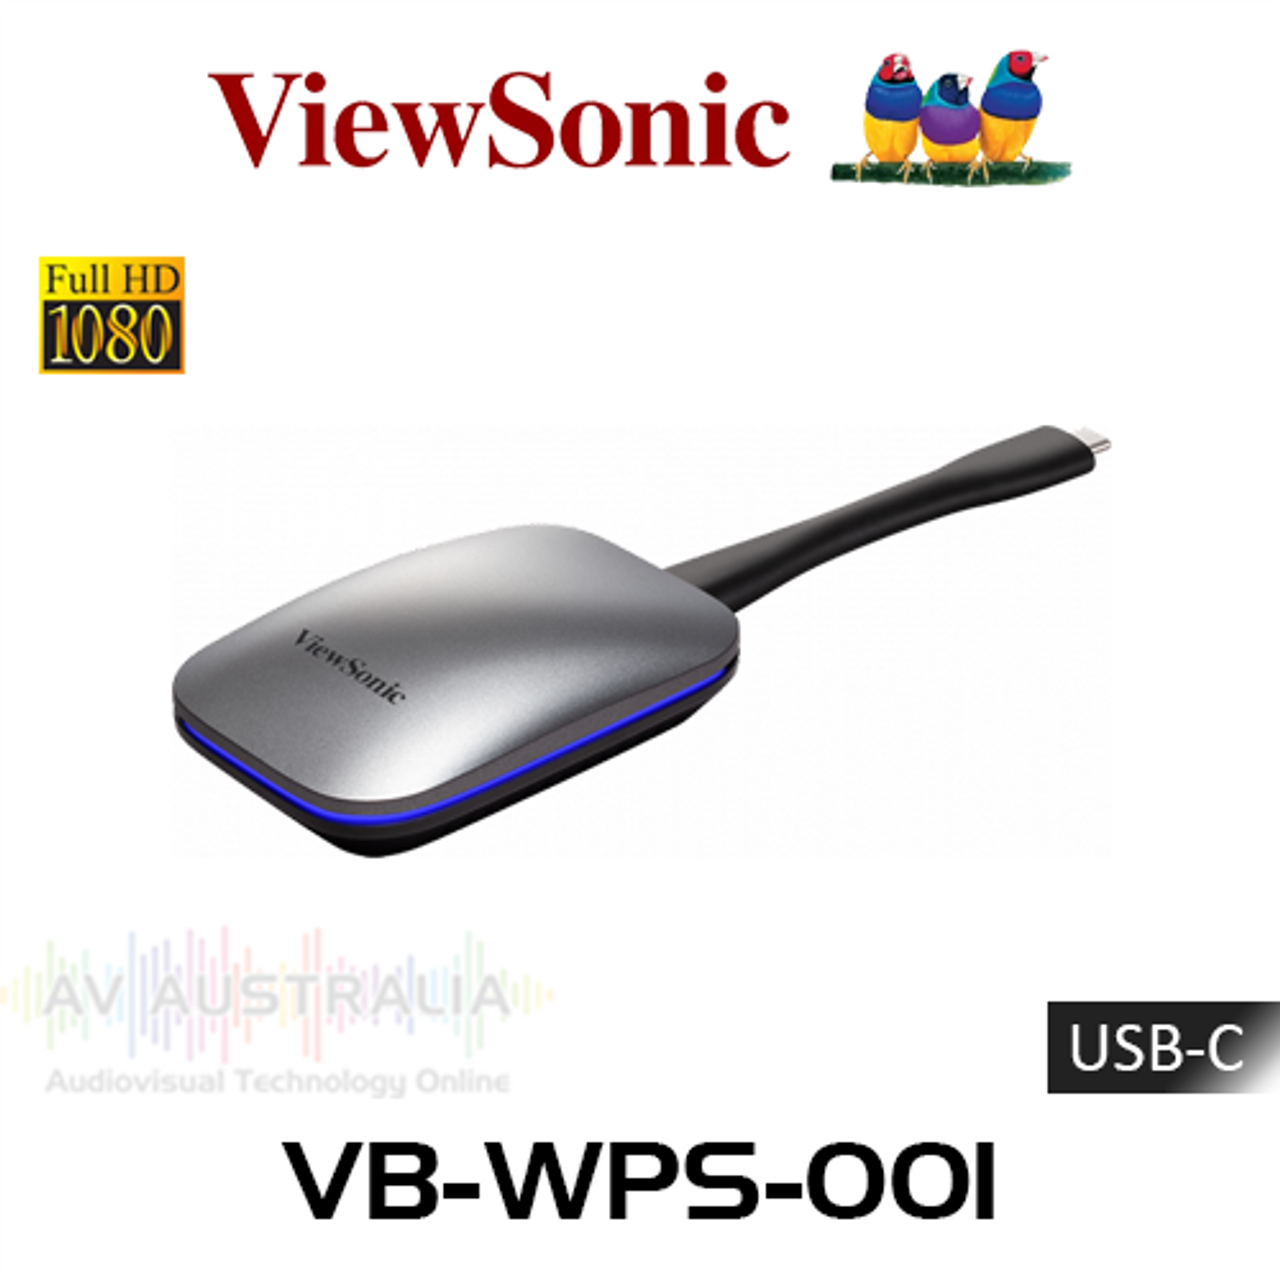 ViewSonic VB-WPS-001 ViewBoard Cast Button with USB-C Connector